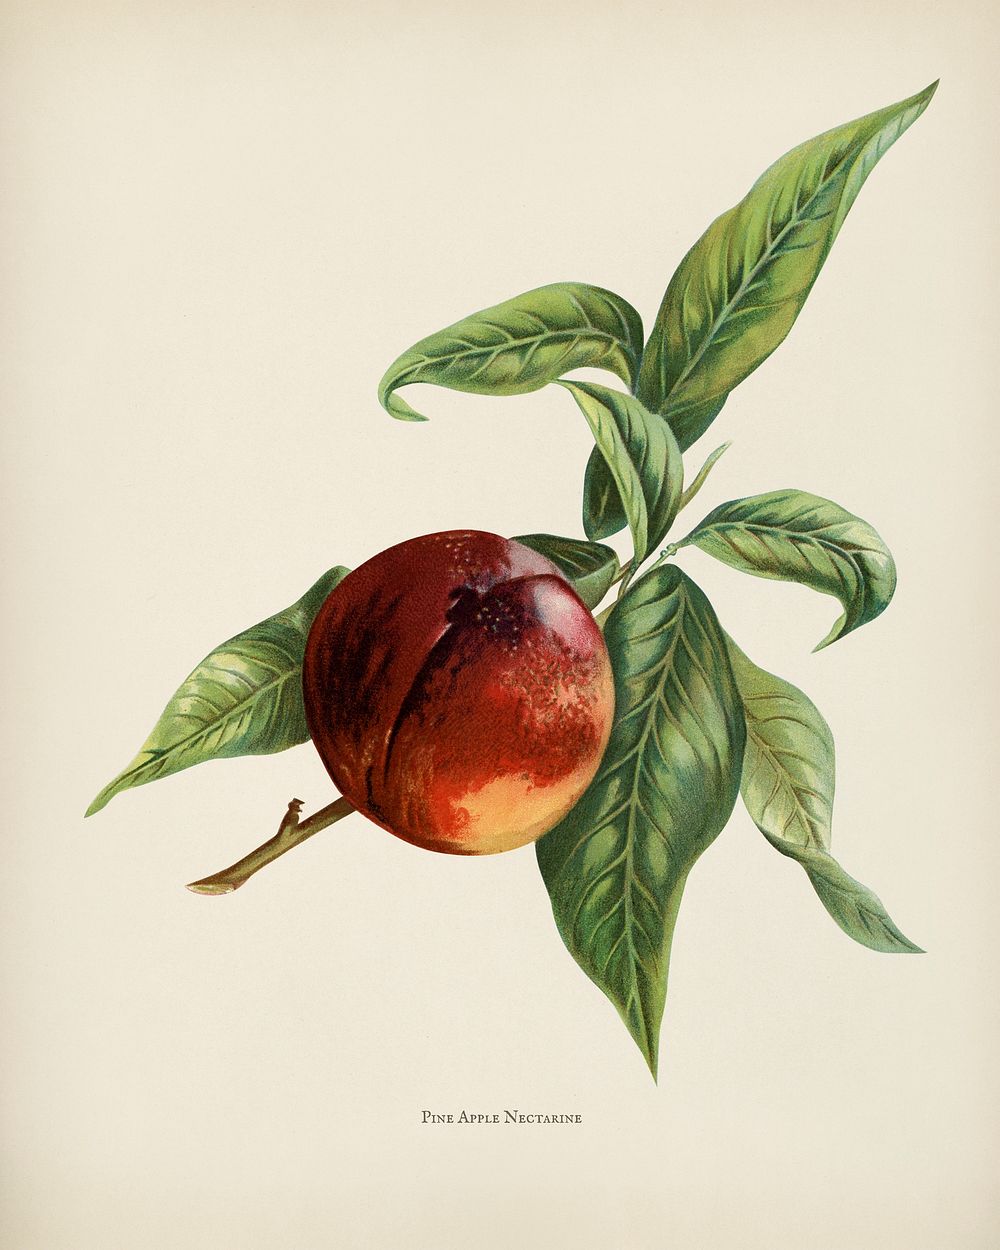 The fruit grower's guide : Vintage illustration of pine apple nectarines